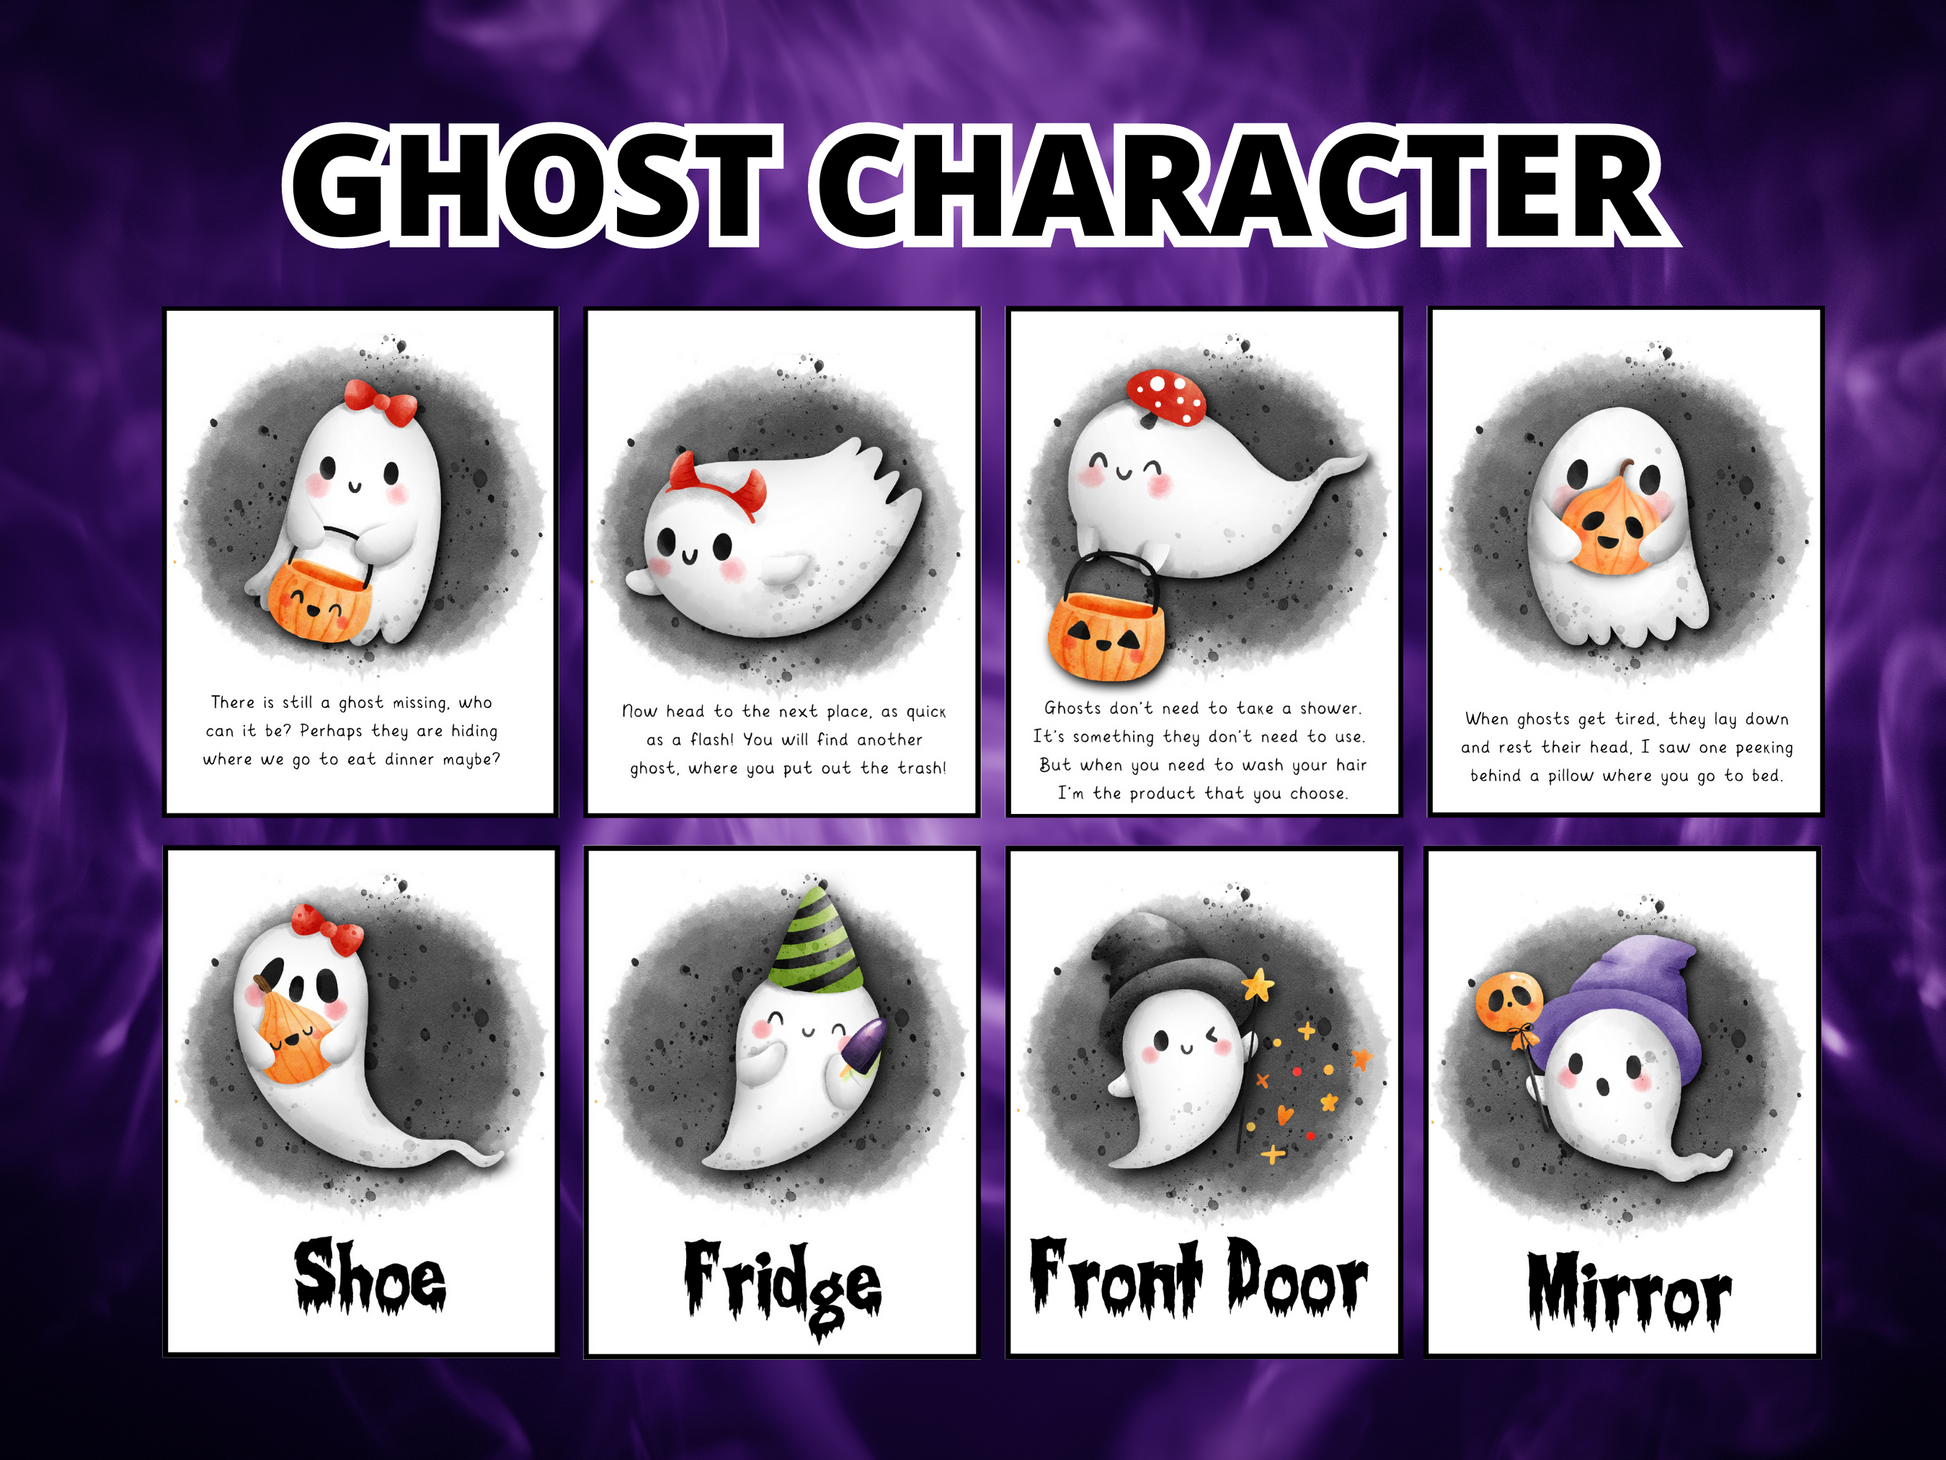 Ghost characters for a treasure hunt for kids. Halloween game.